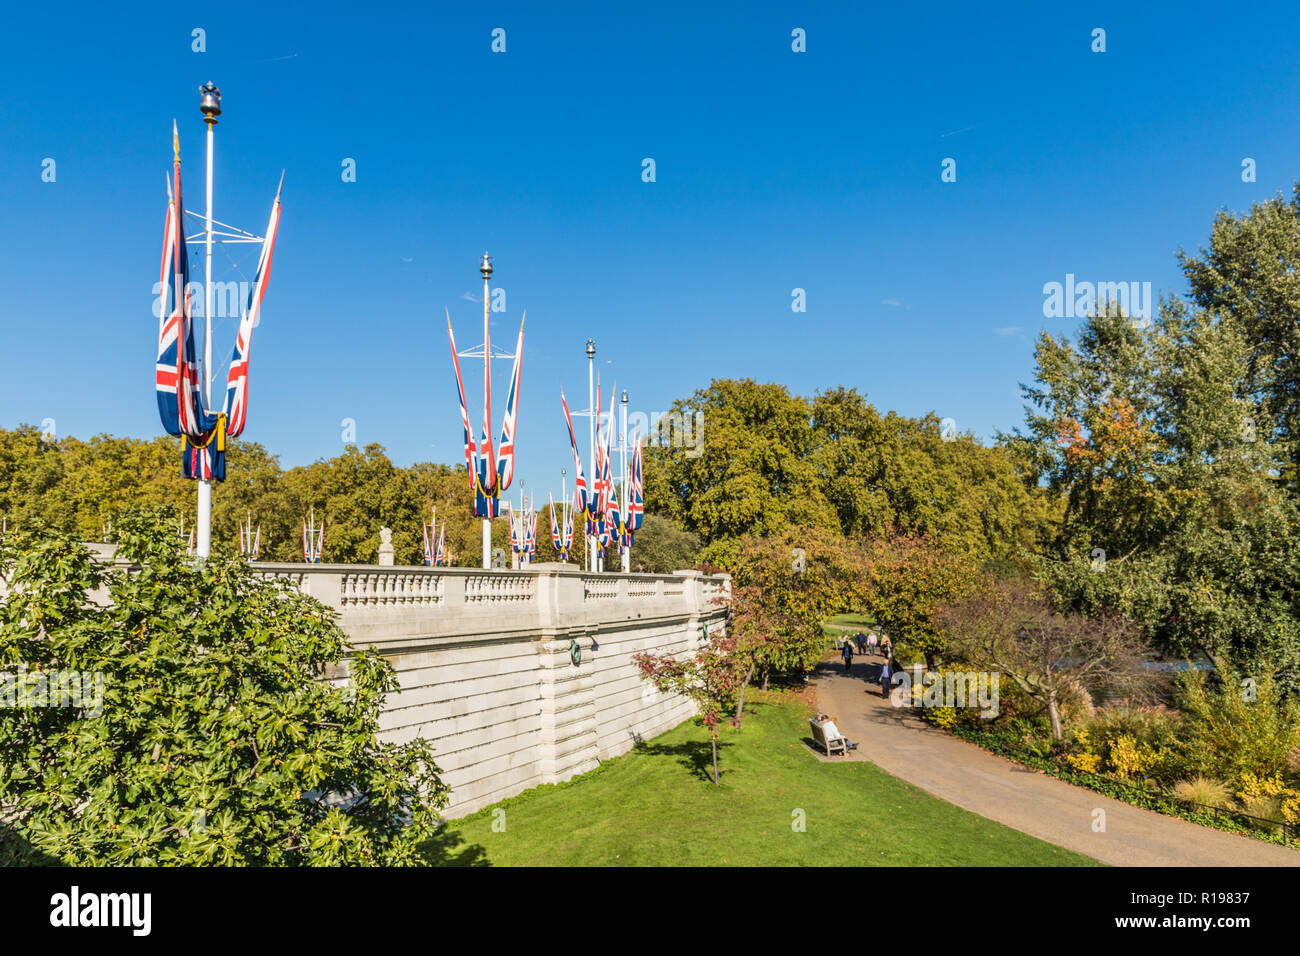 London. November 2018. A view of Union Jack flags around Buckingham palace in London Stock Photo